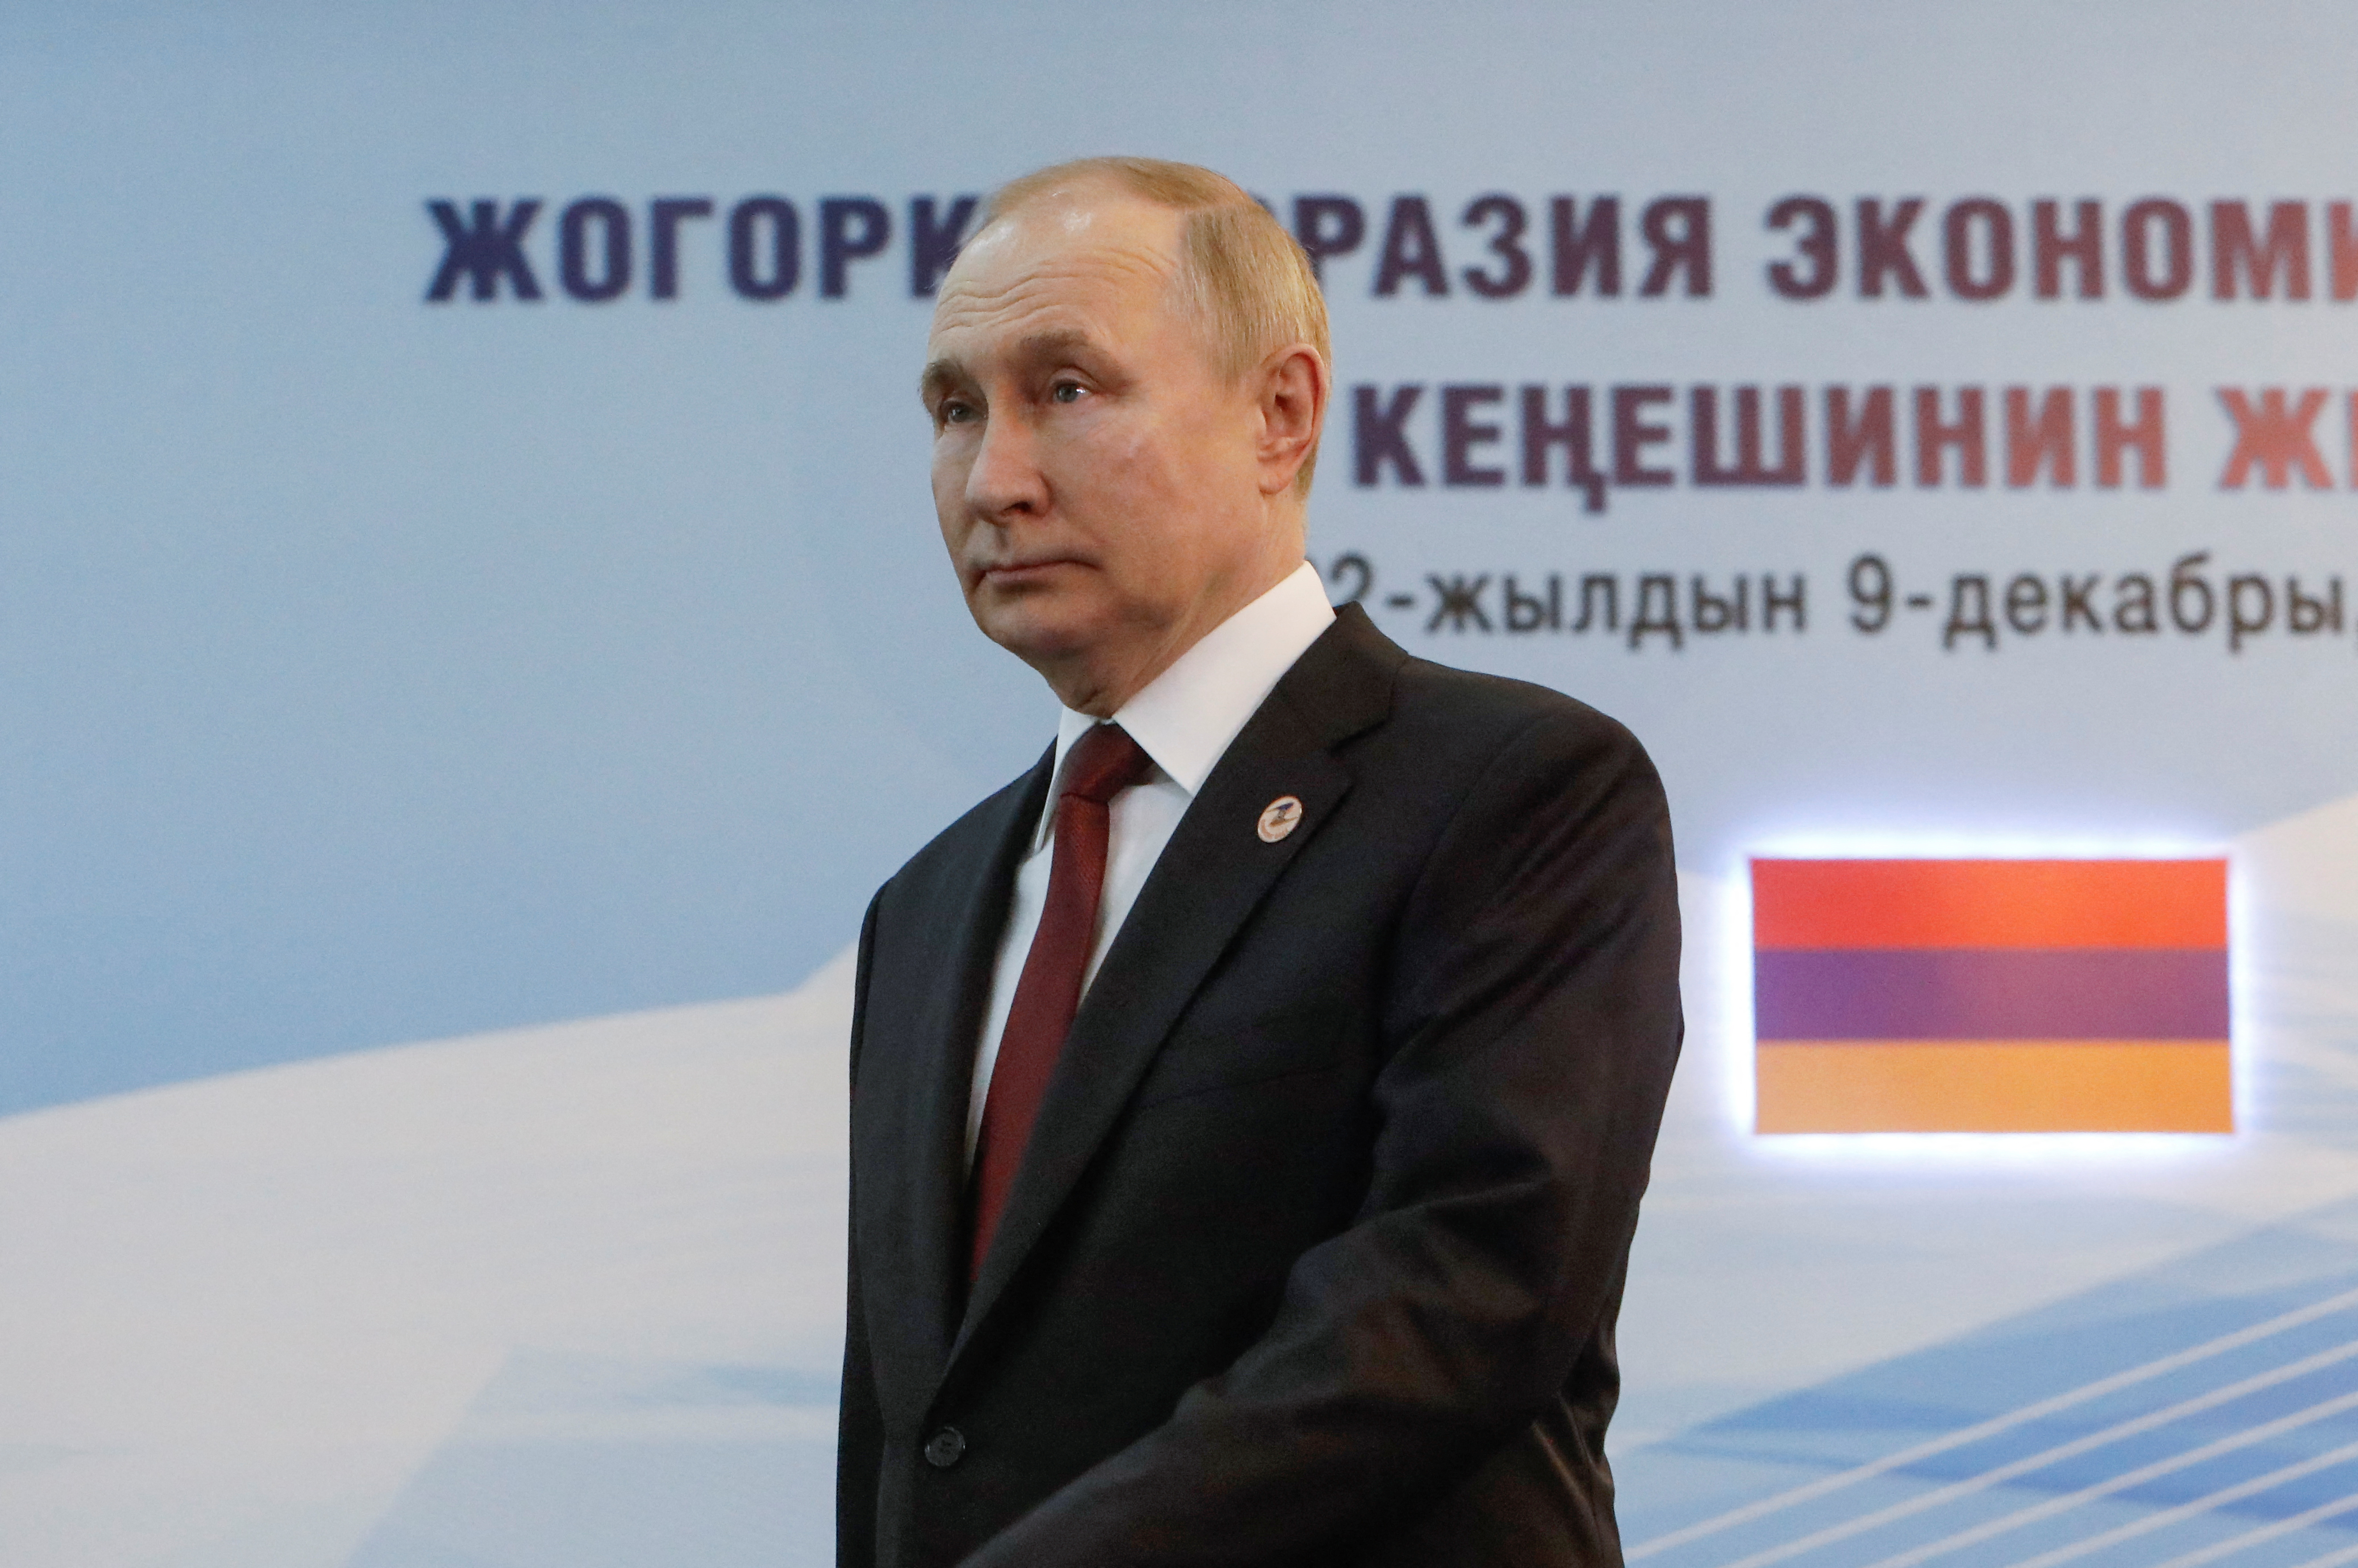 Russian President Putin attends a meeting of the Supreme Eurasian Economic Council in Bishkek